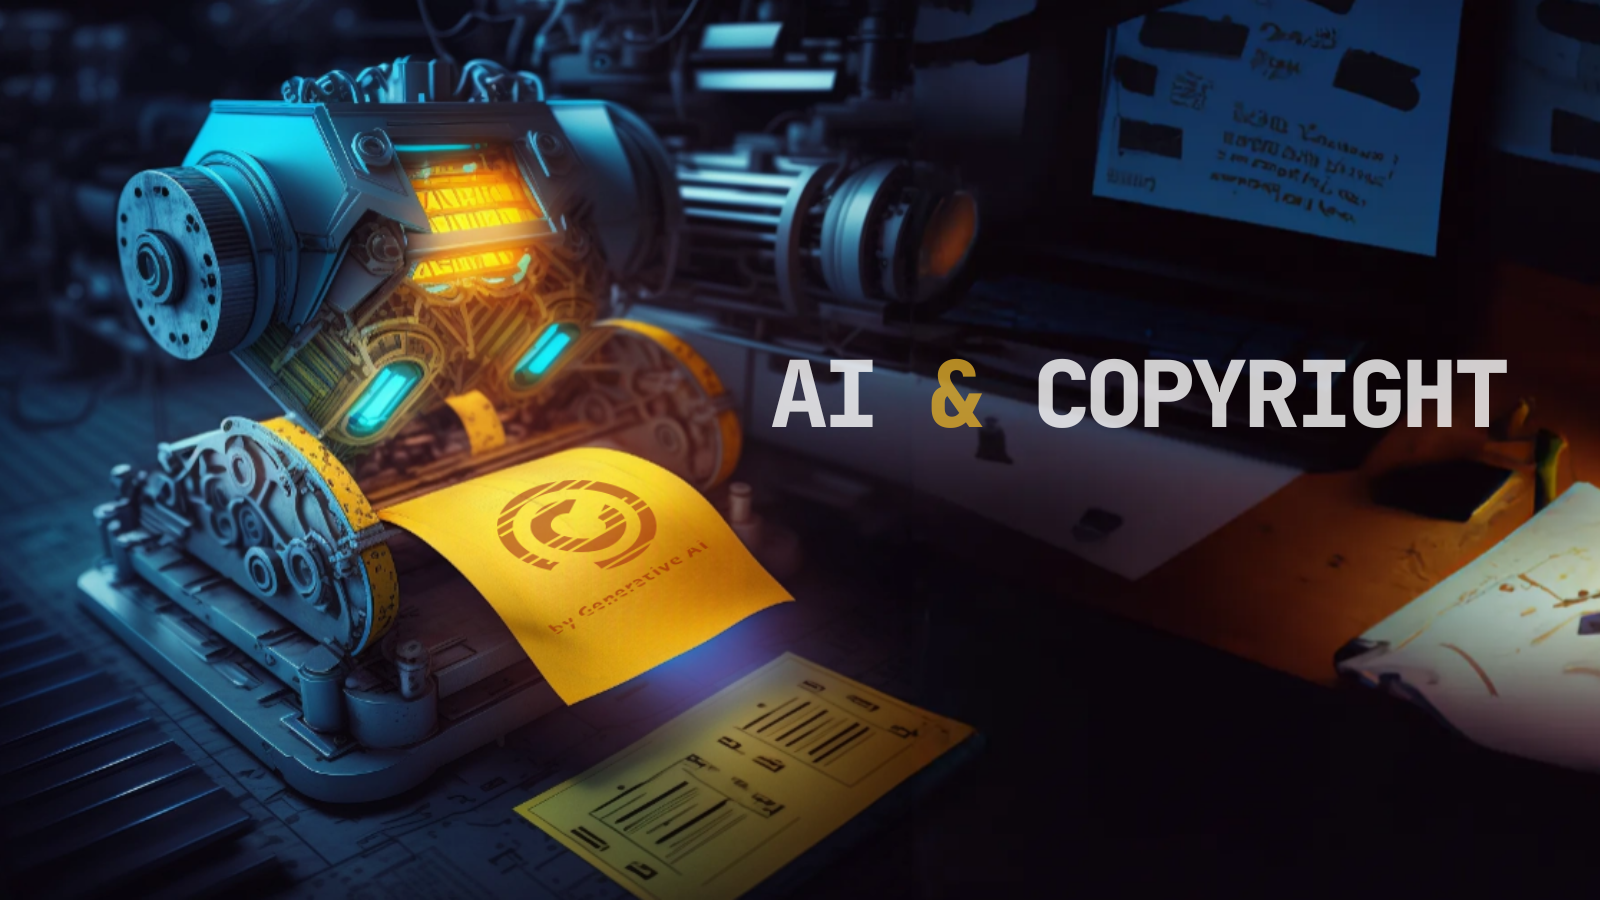 The Battle over Copyright in the Age of AI